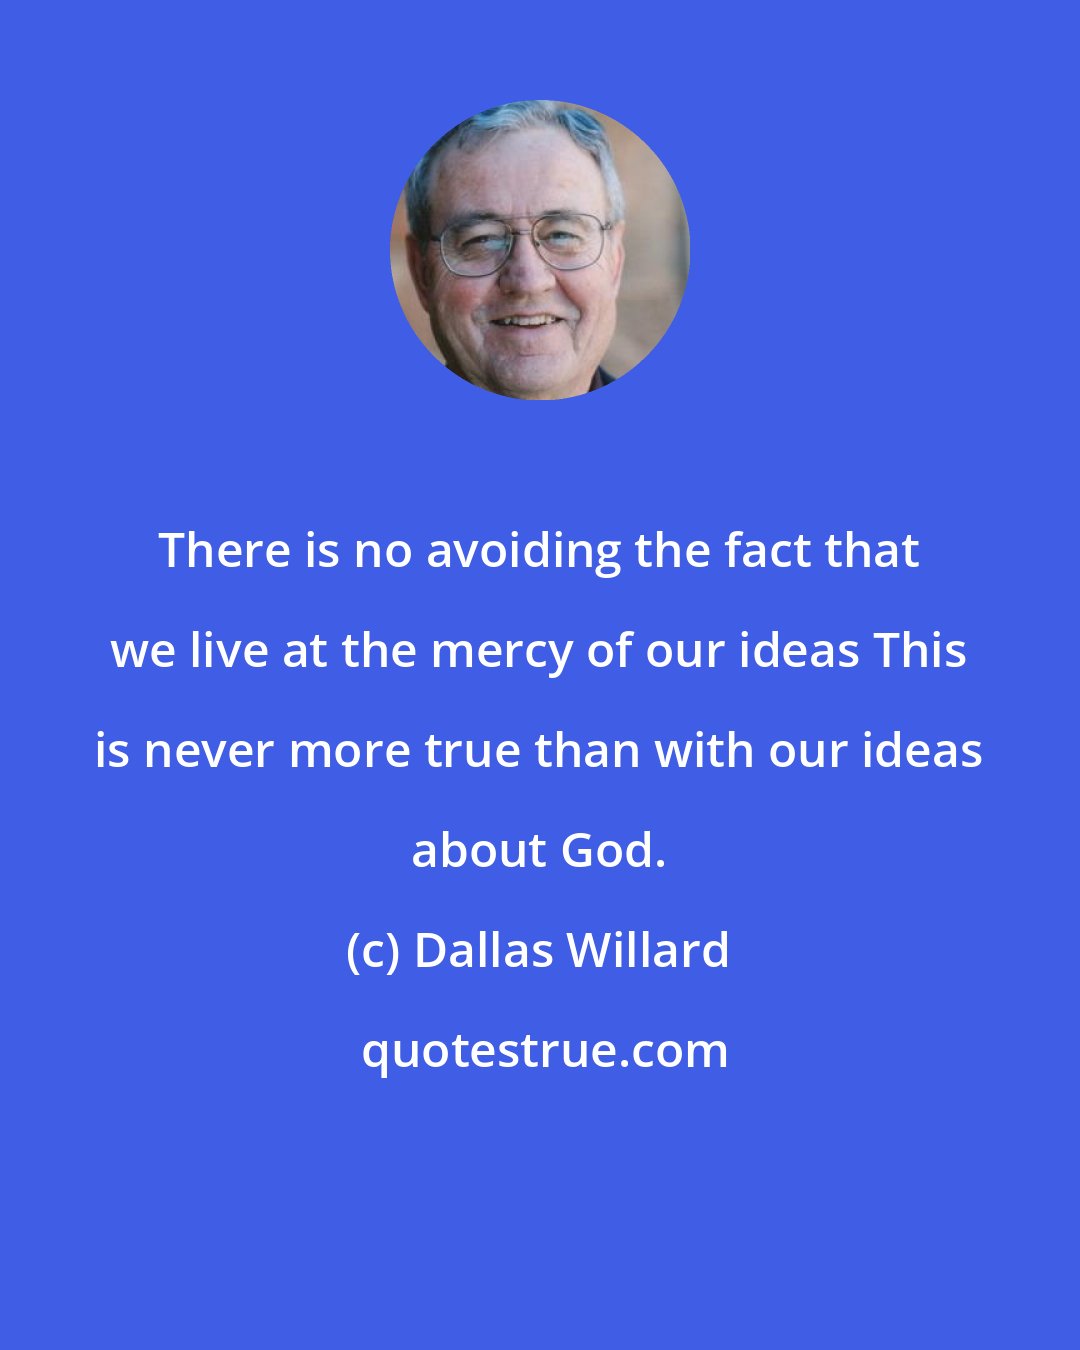 Dallas Willard: There is no avoiding the fact that we live at the mercy of our ideas This is never more true than with our ideas about God.